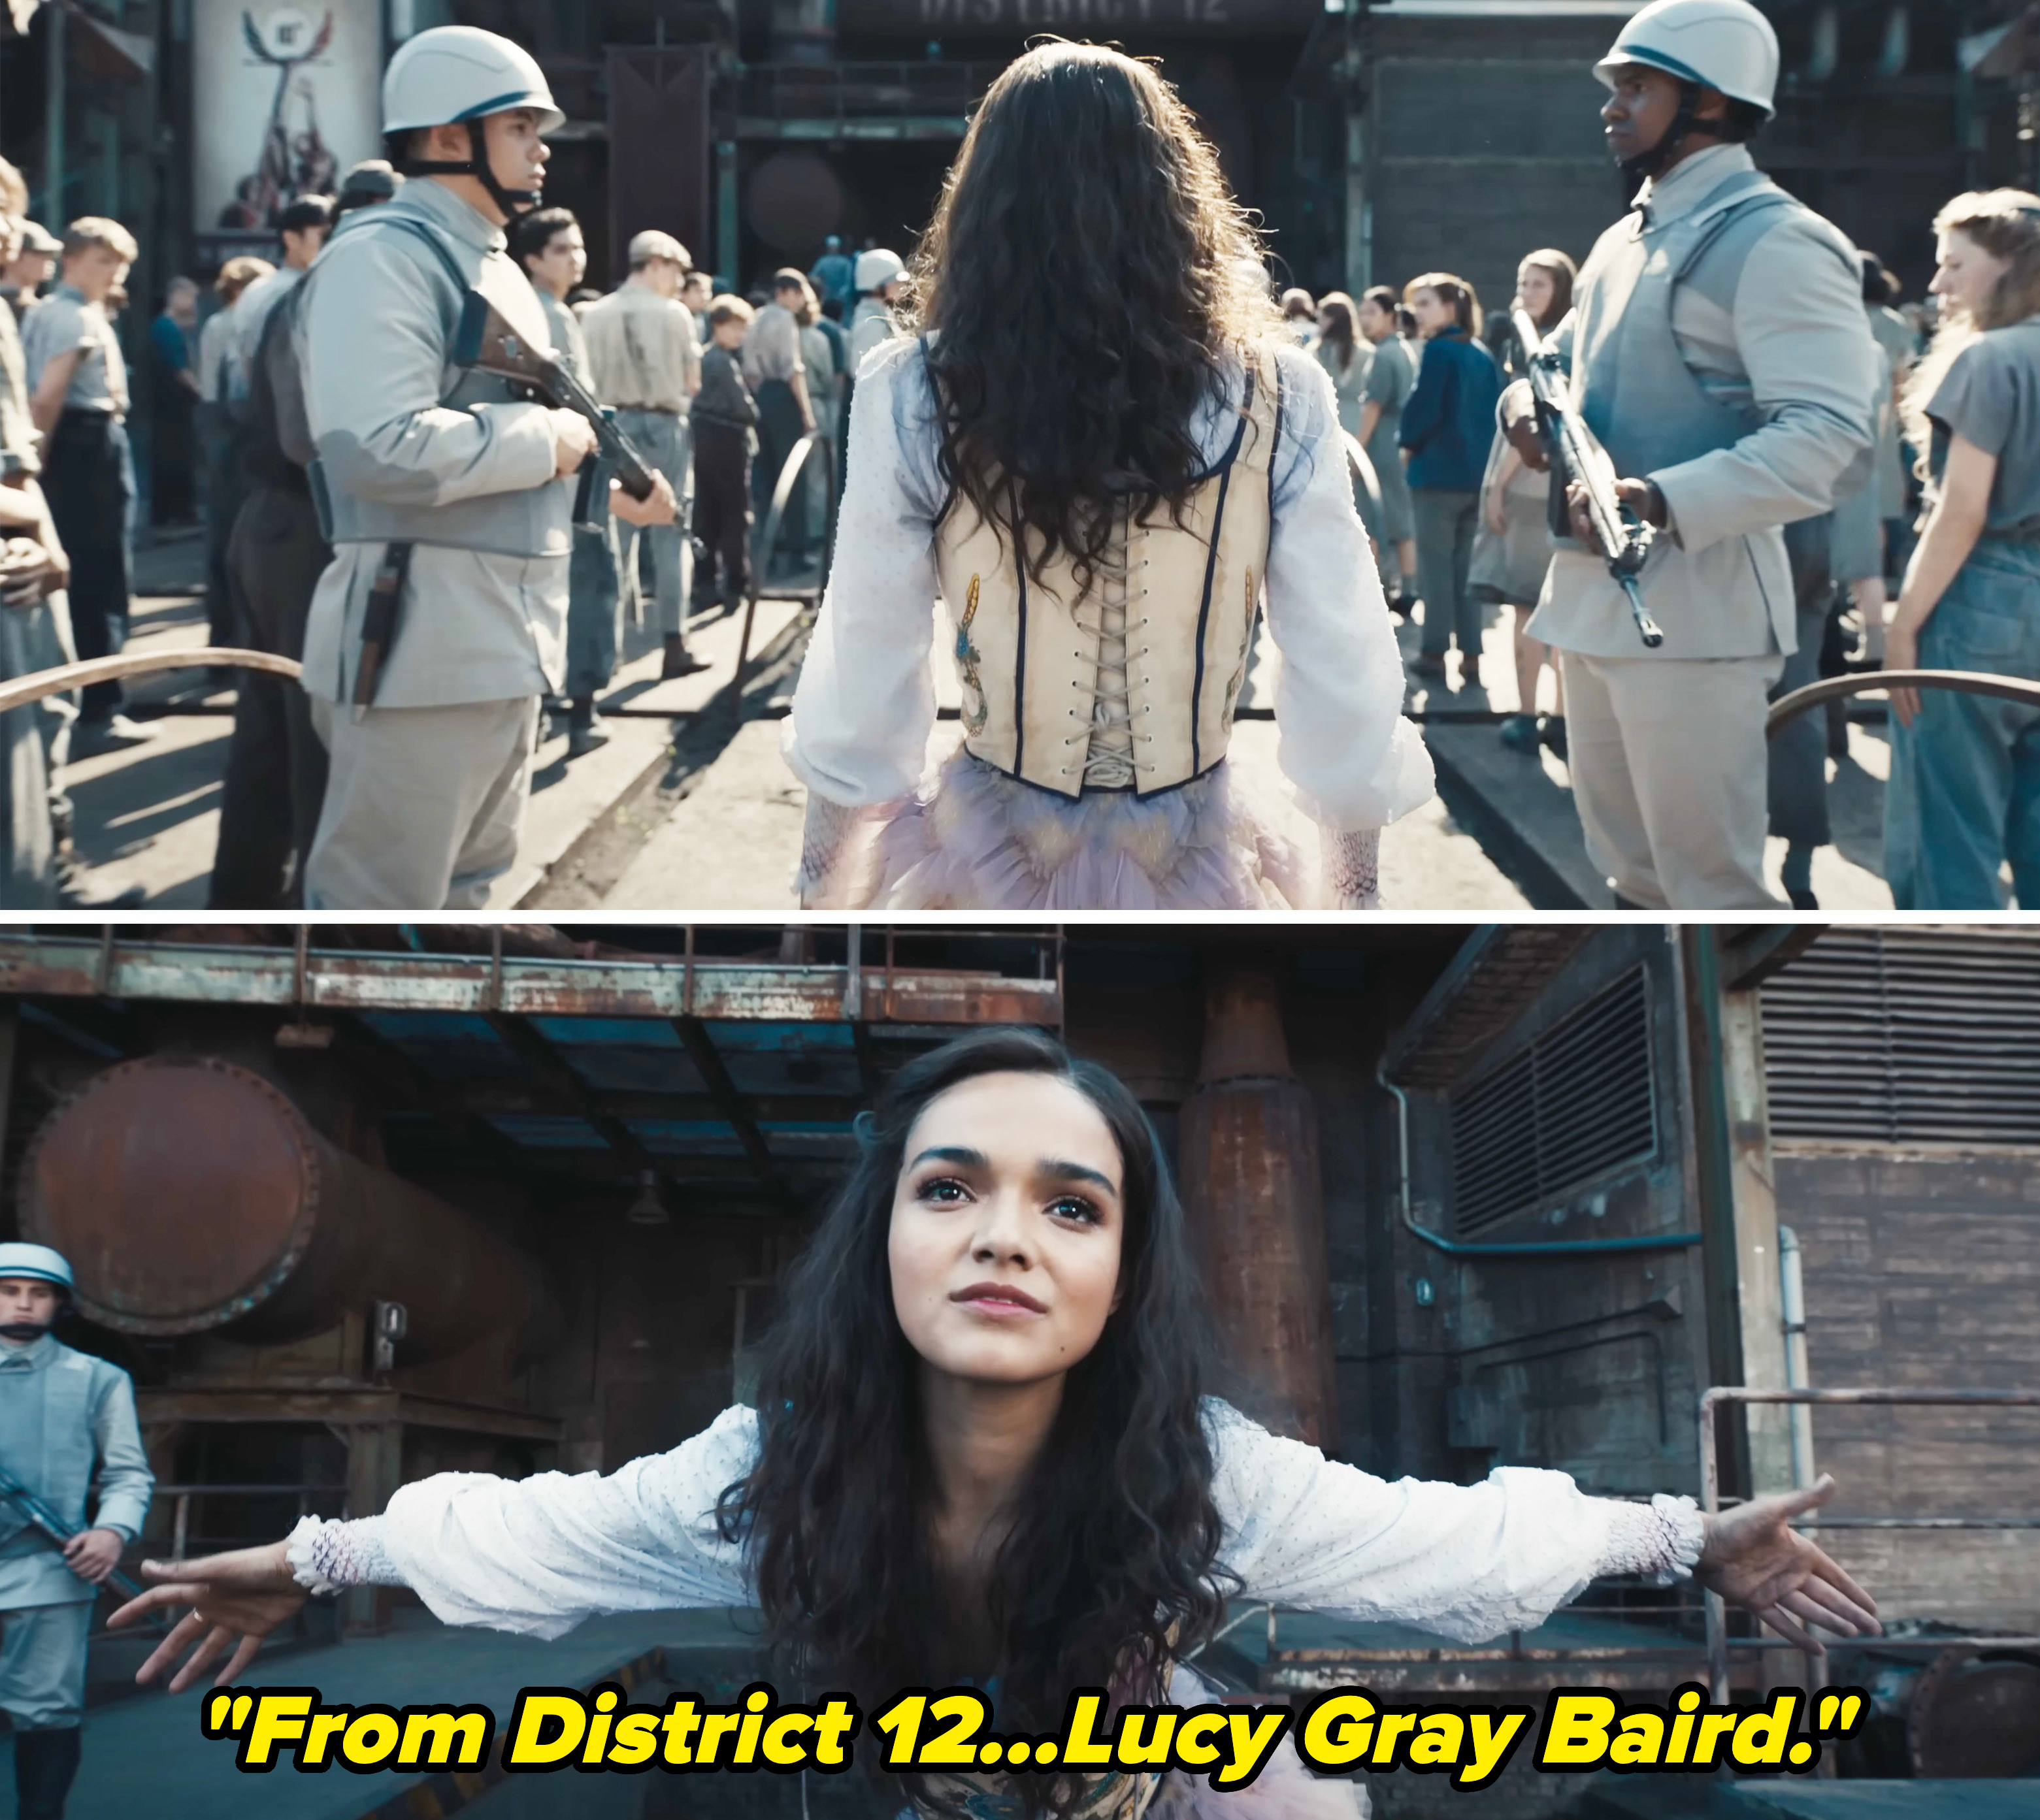 Lucy Gray bowing and a voice saying, "From District 12, Lucy Gray Baird"